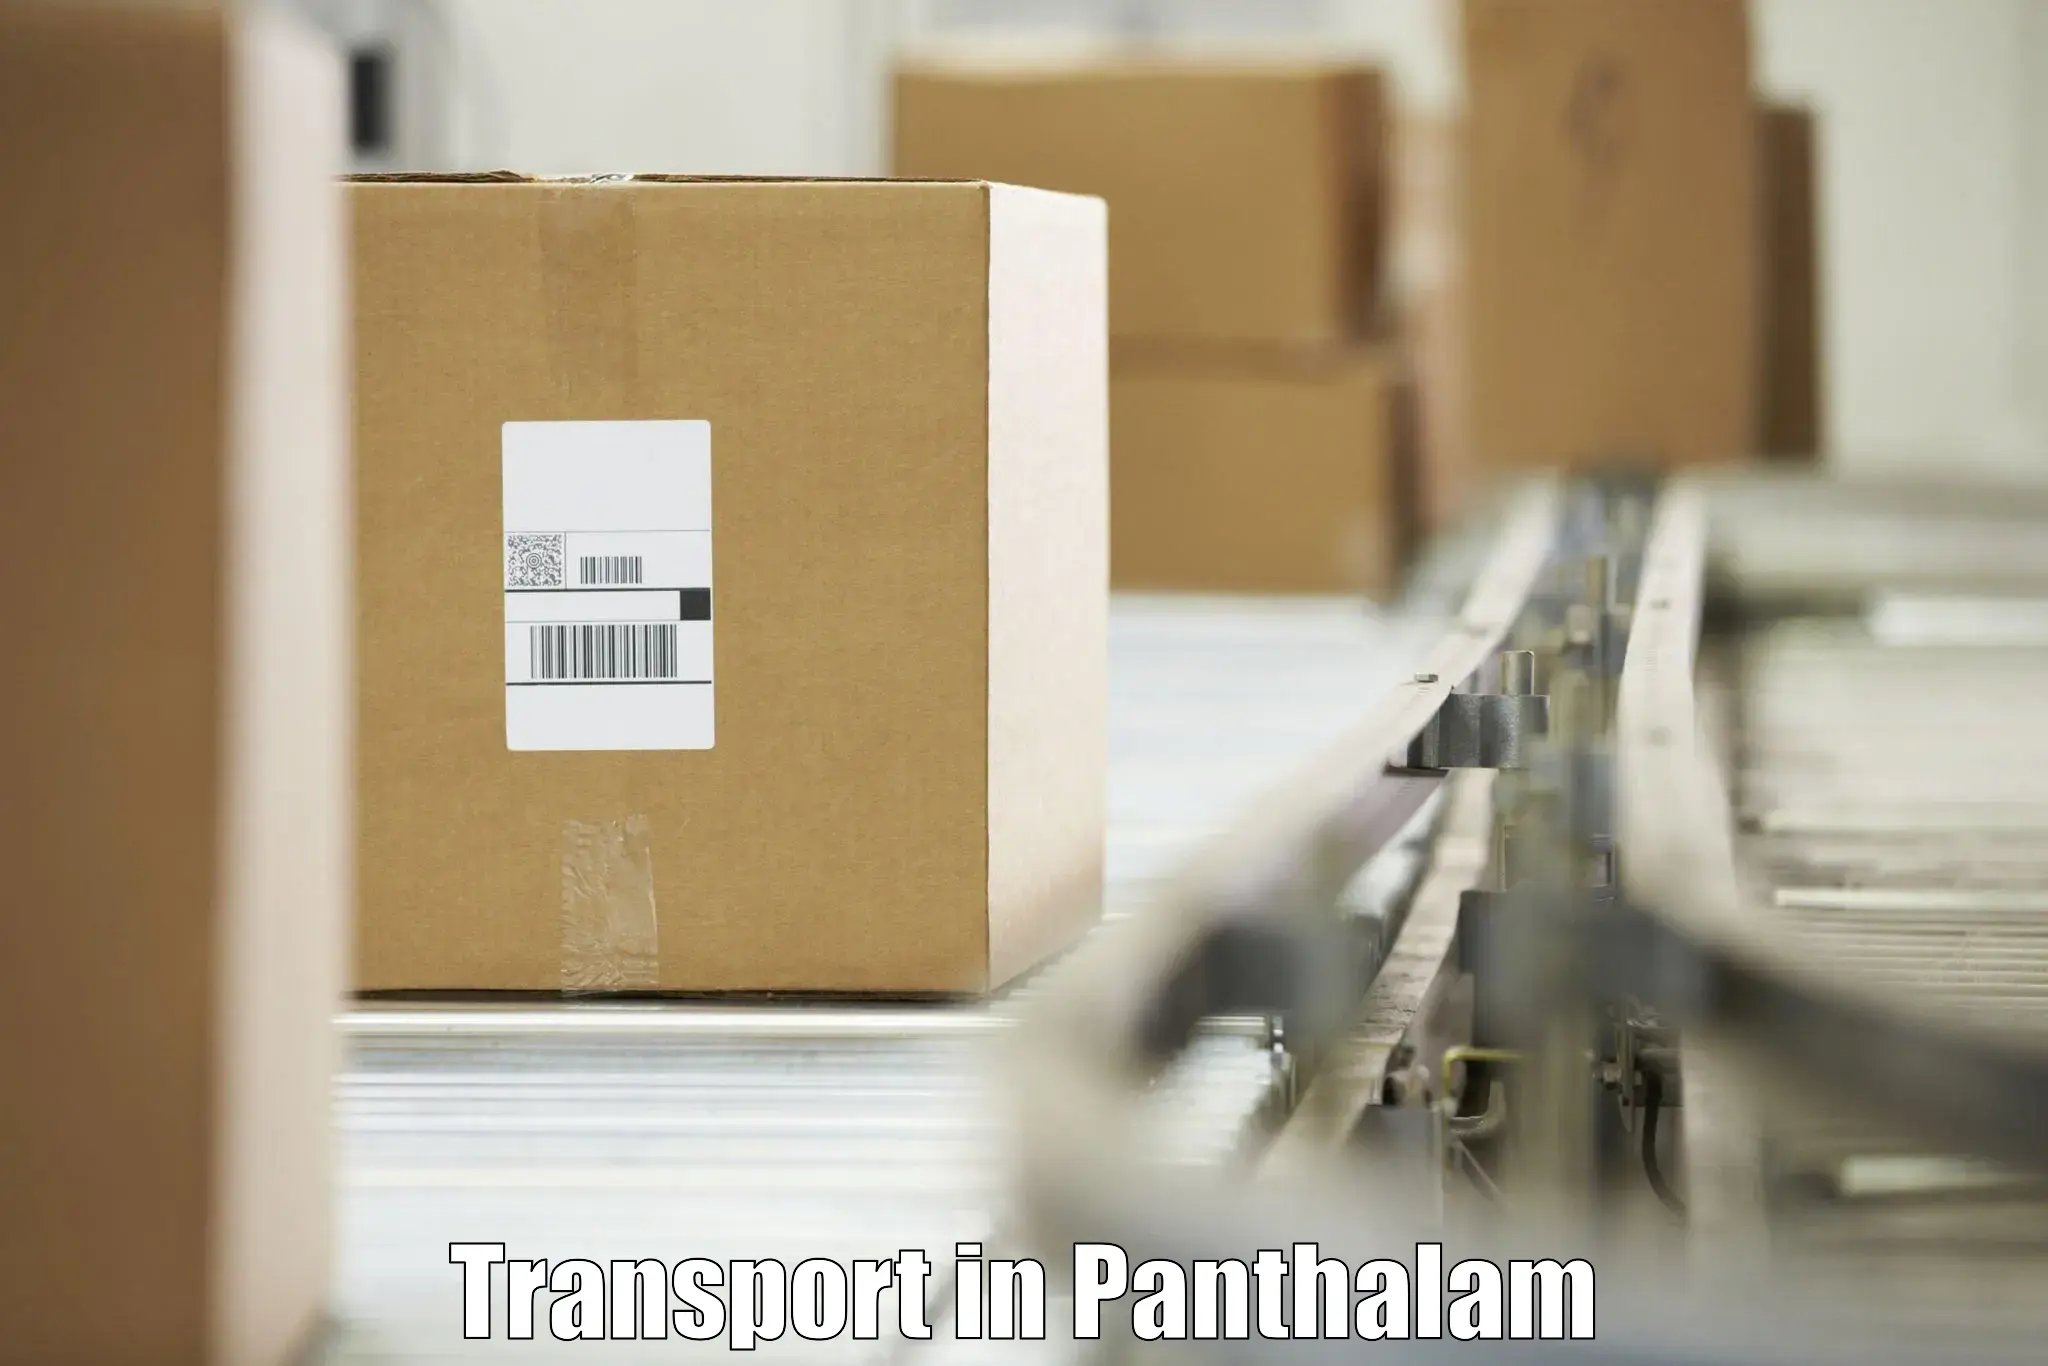 Container transport service in Panthalam